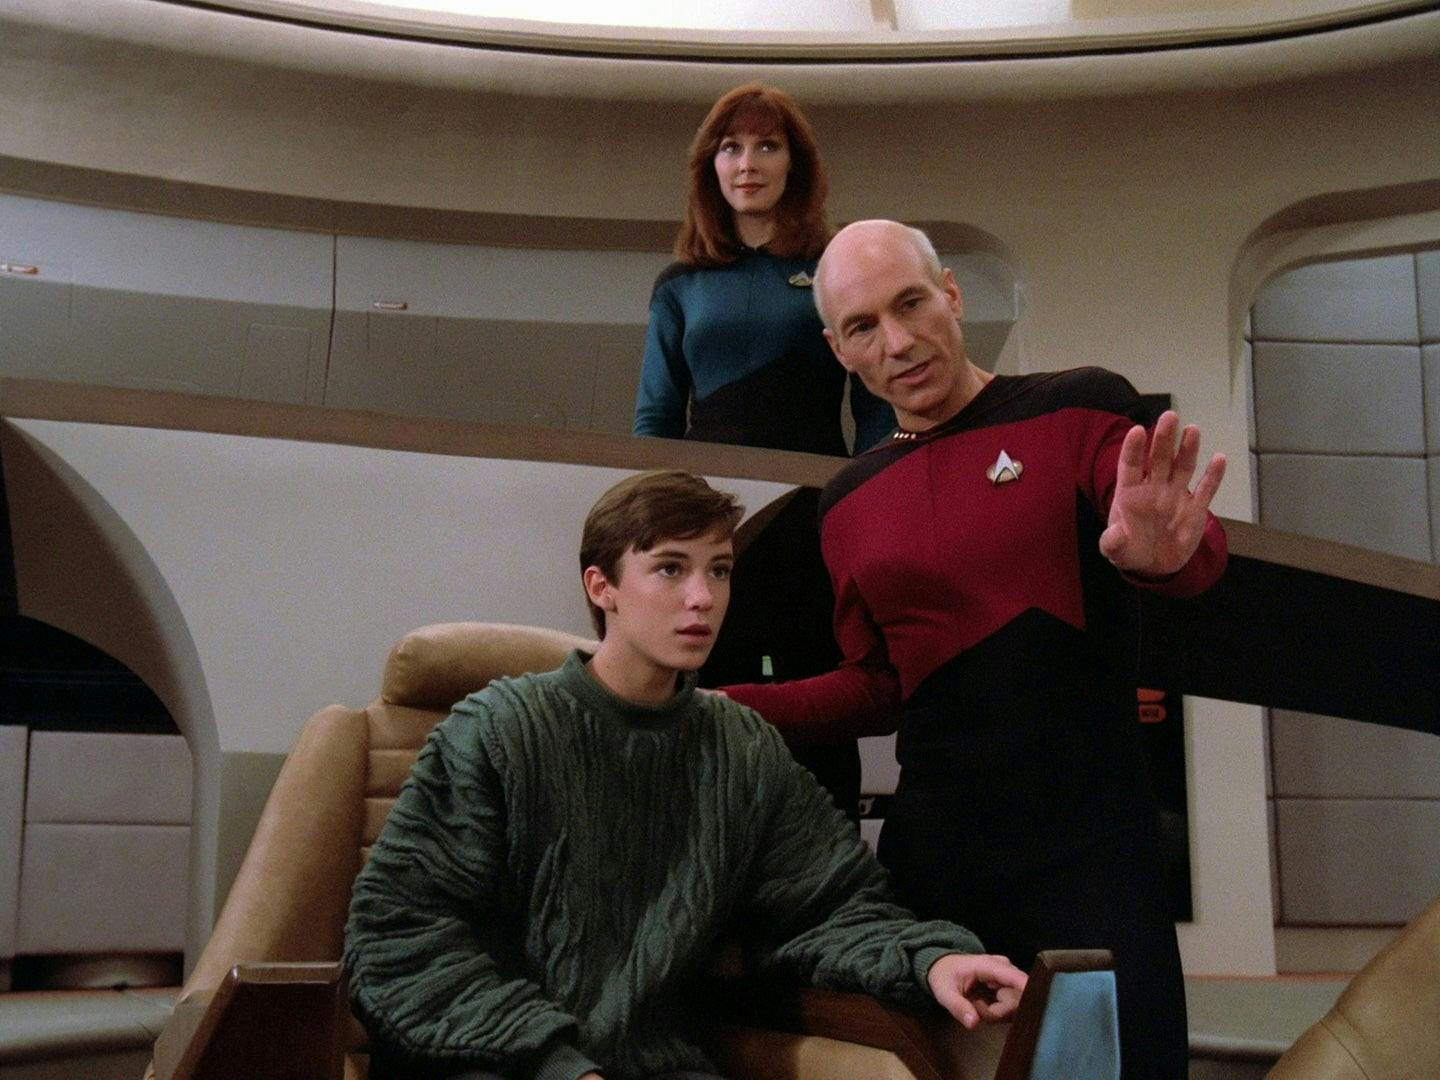 On the Enterprise-D, Picard shows Wesley the Bridge as Beverly watches the pair on Star Trek: The Next Generation